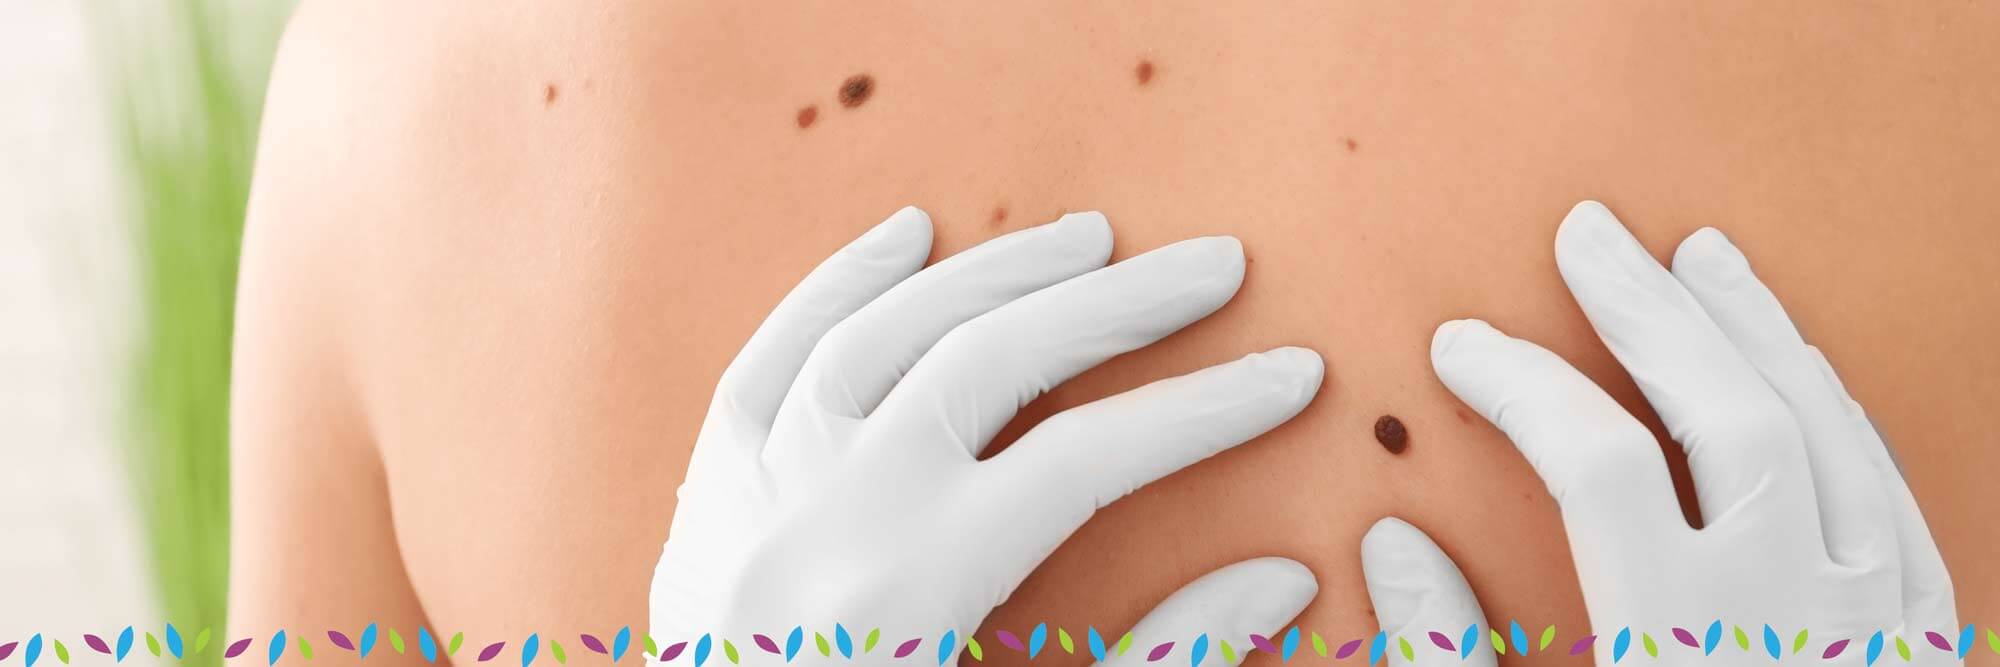 Melanoma  early detection and treatment are critical  Harvard Health